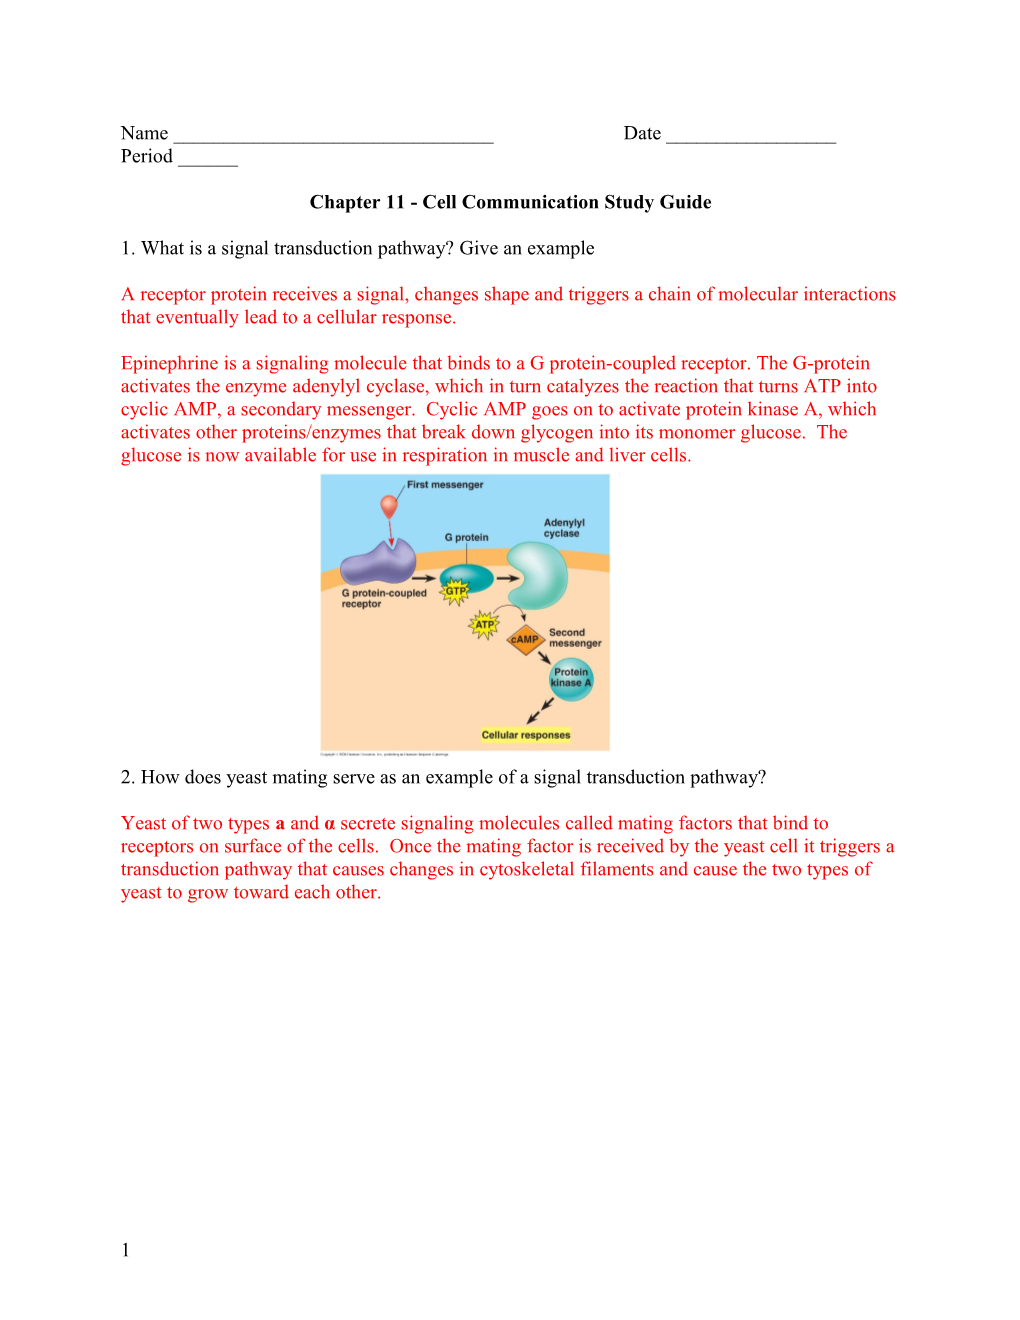 Chapter 11 - Cell Communication Study Guide